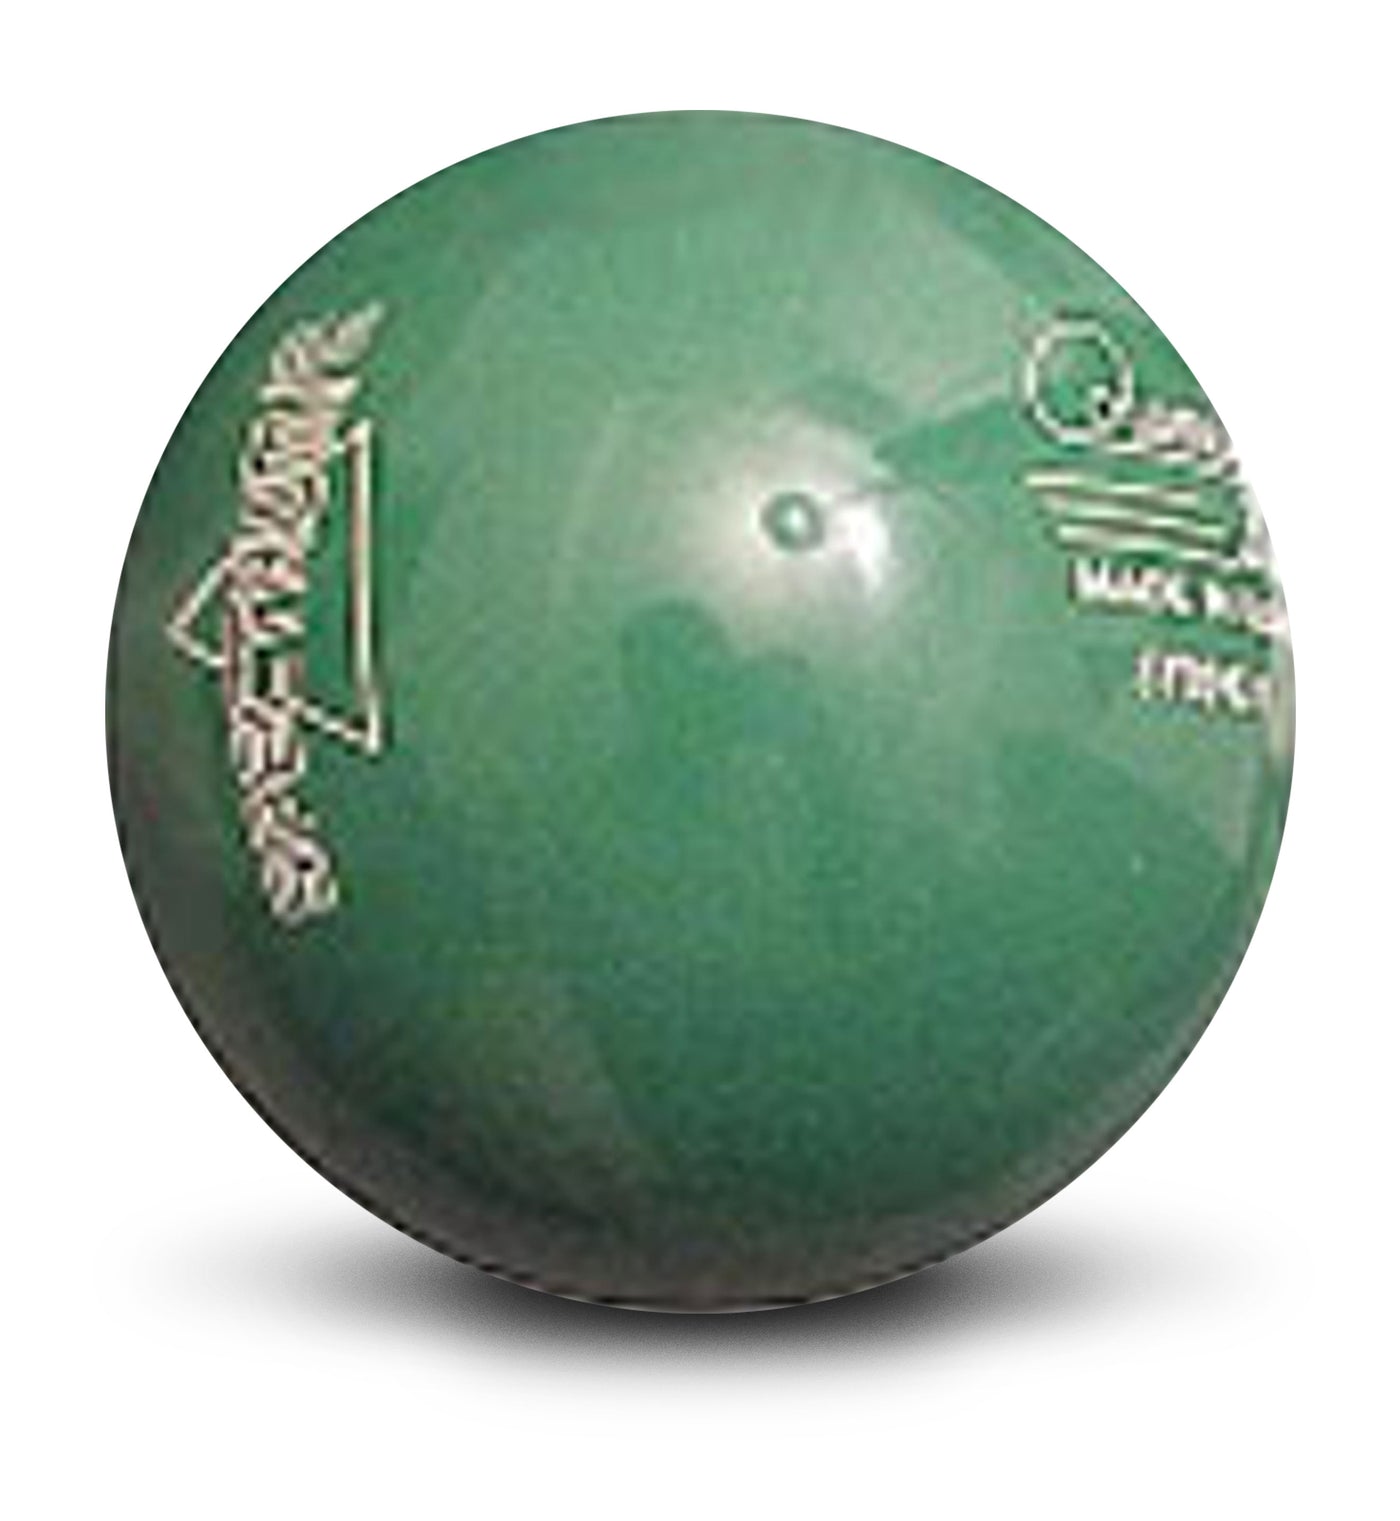 Spectrum-R Red Bowling Ball